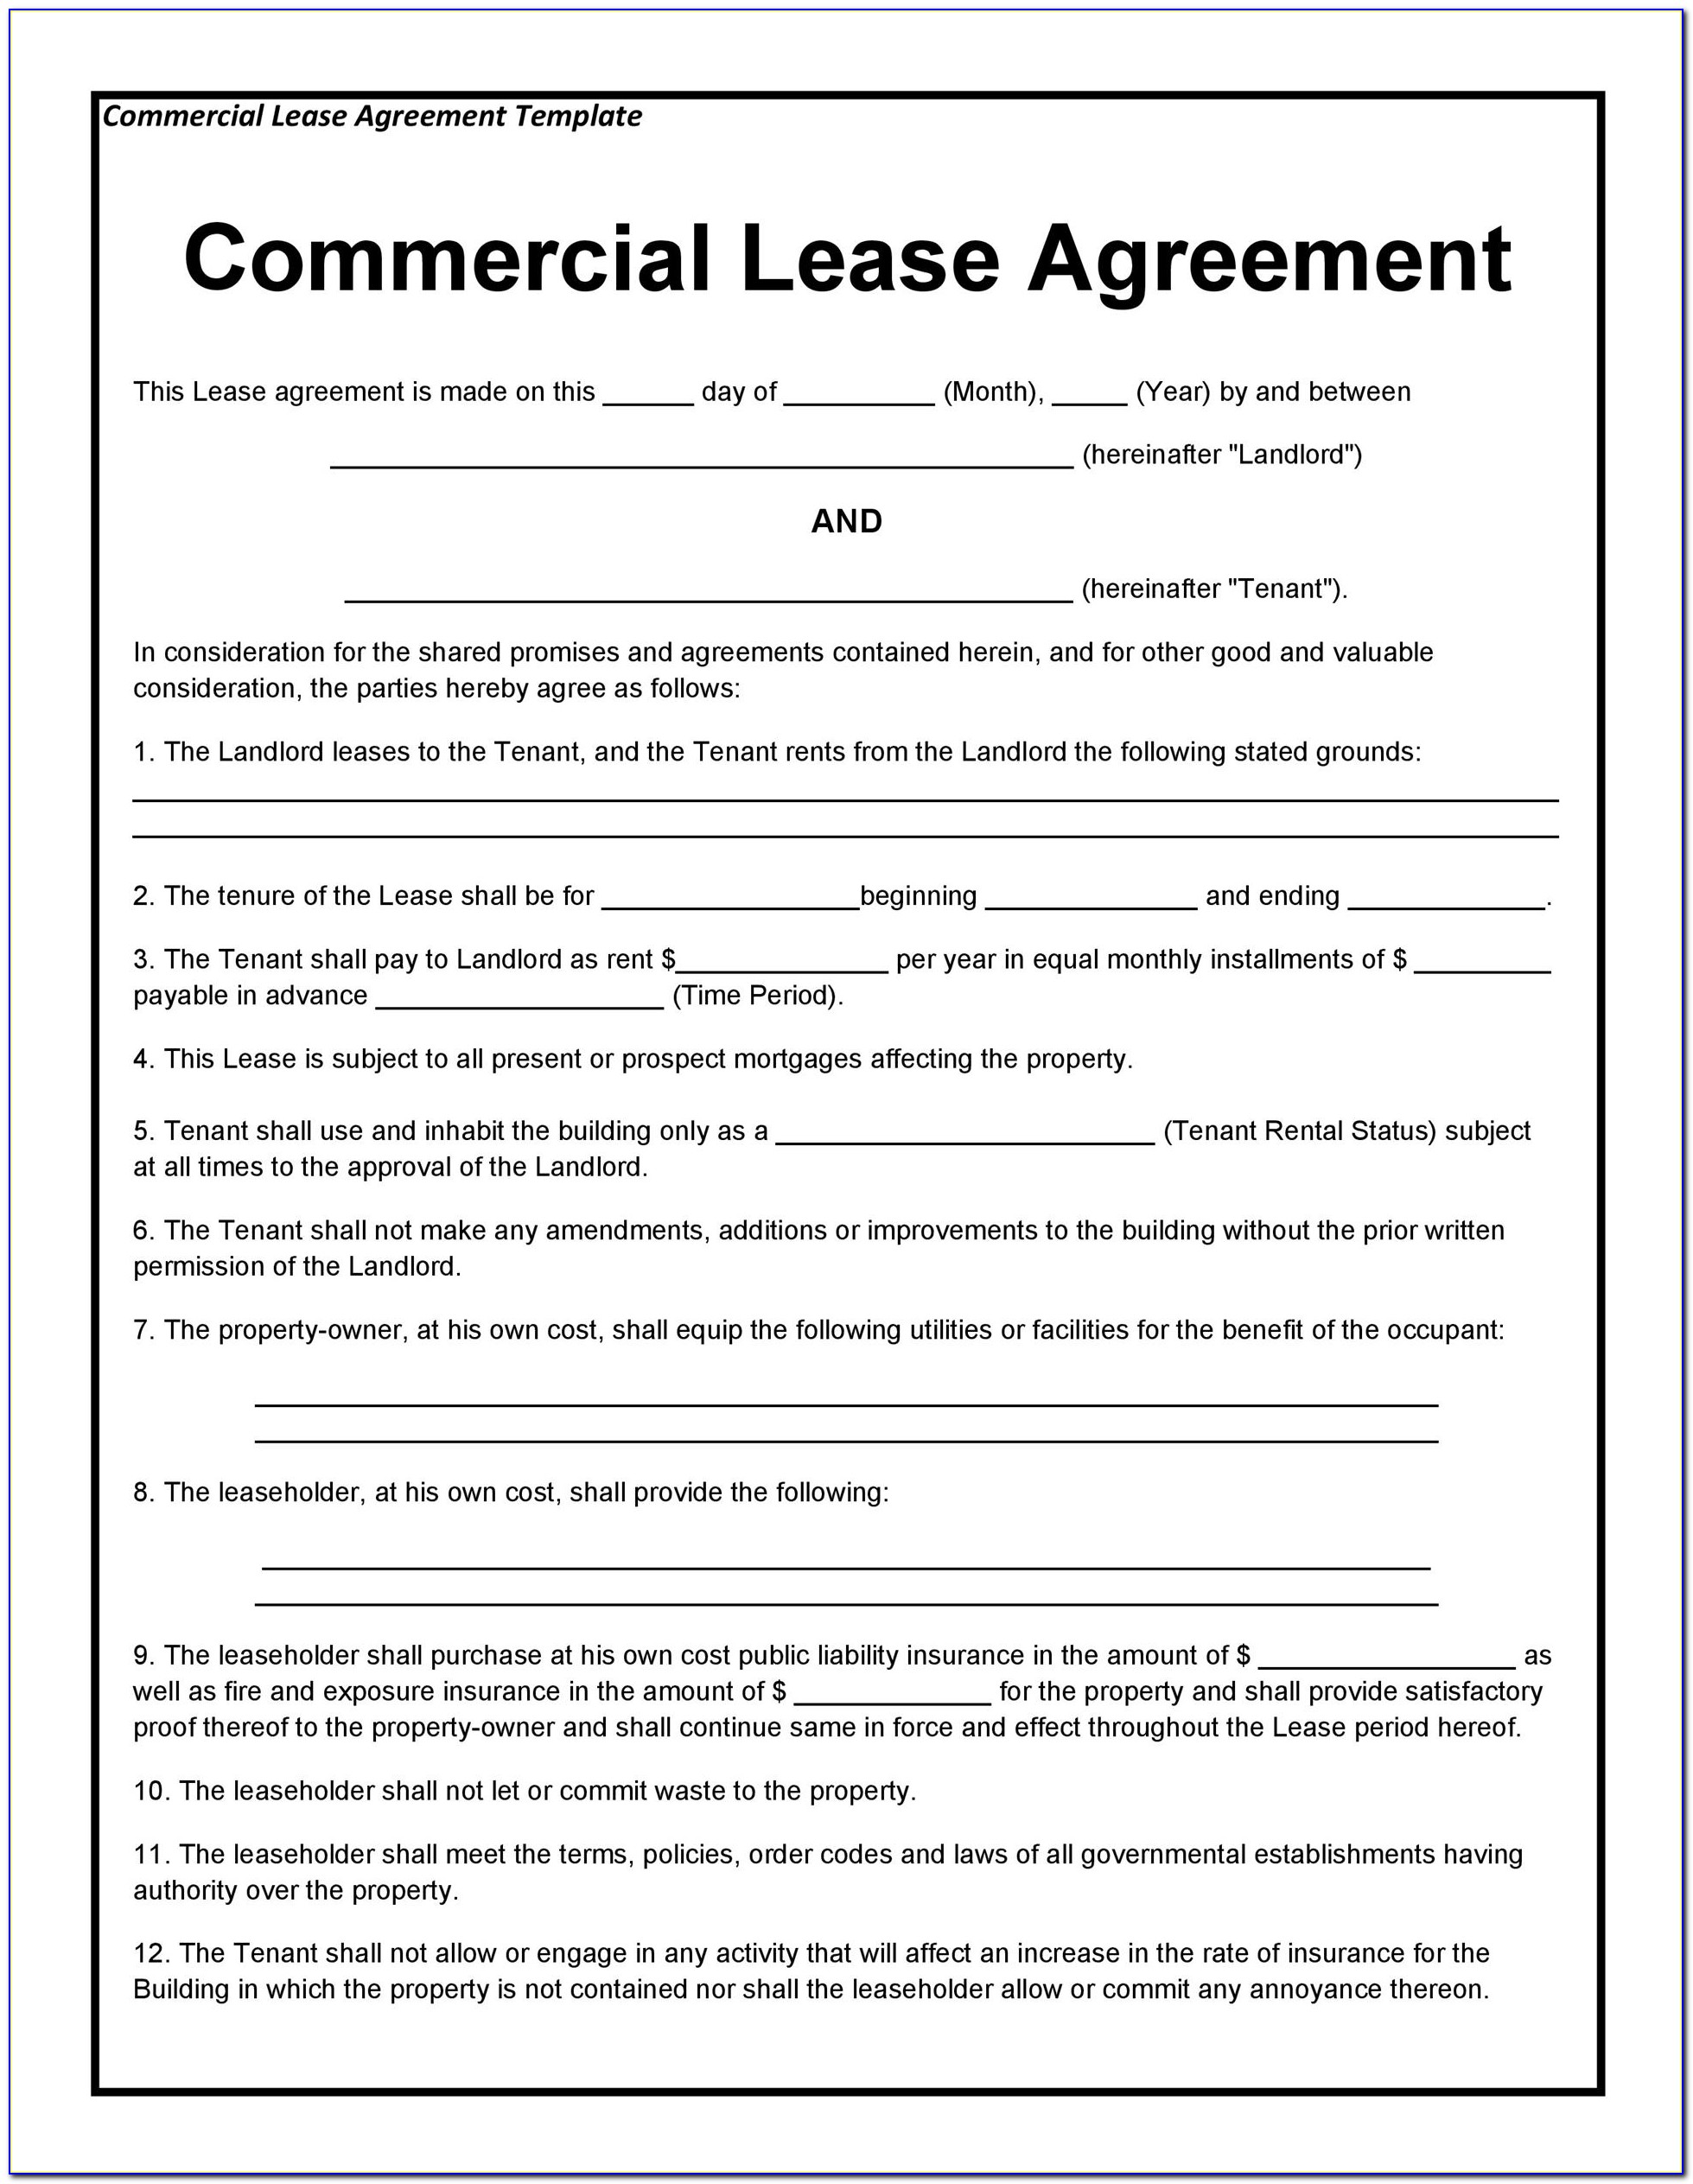 Commercial Lease Contract Template Uk